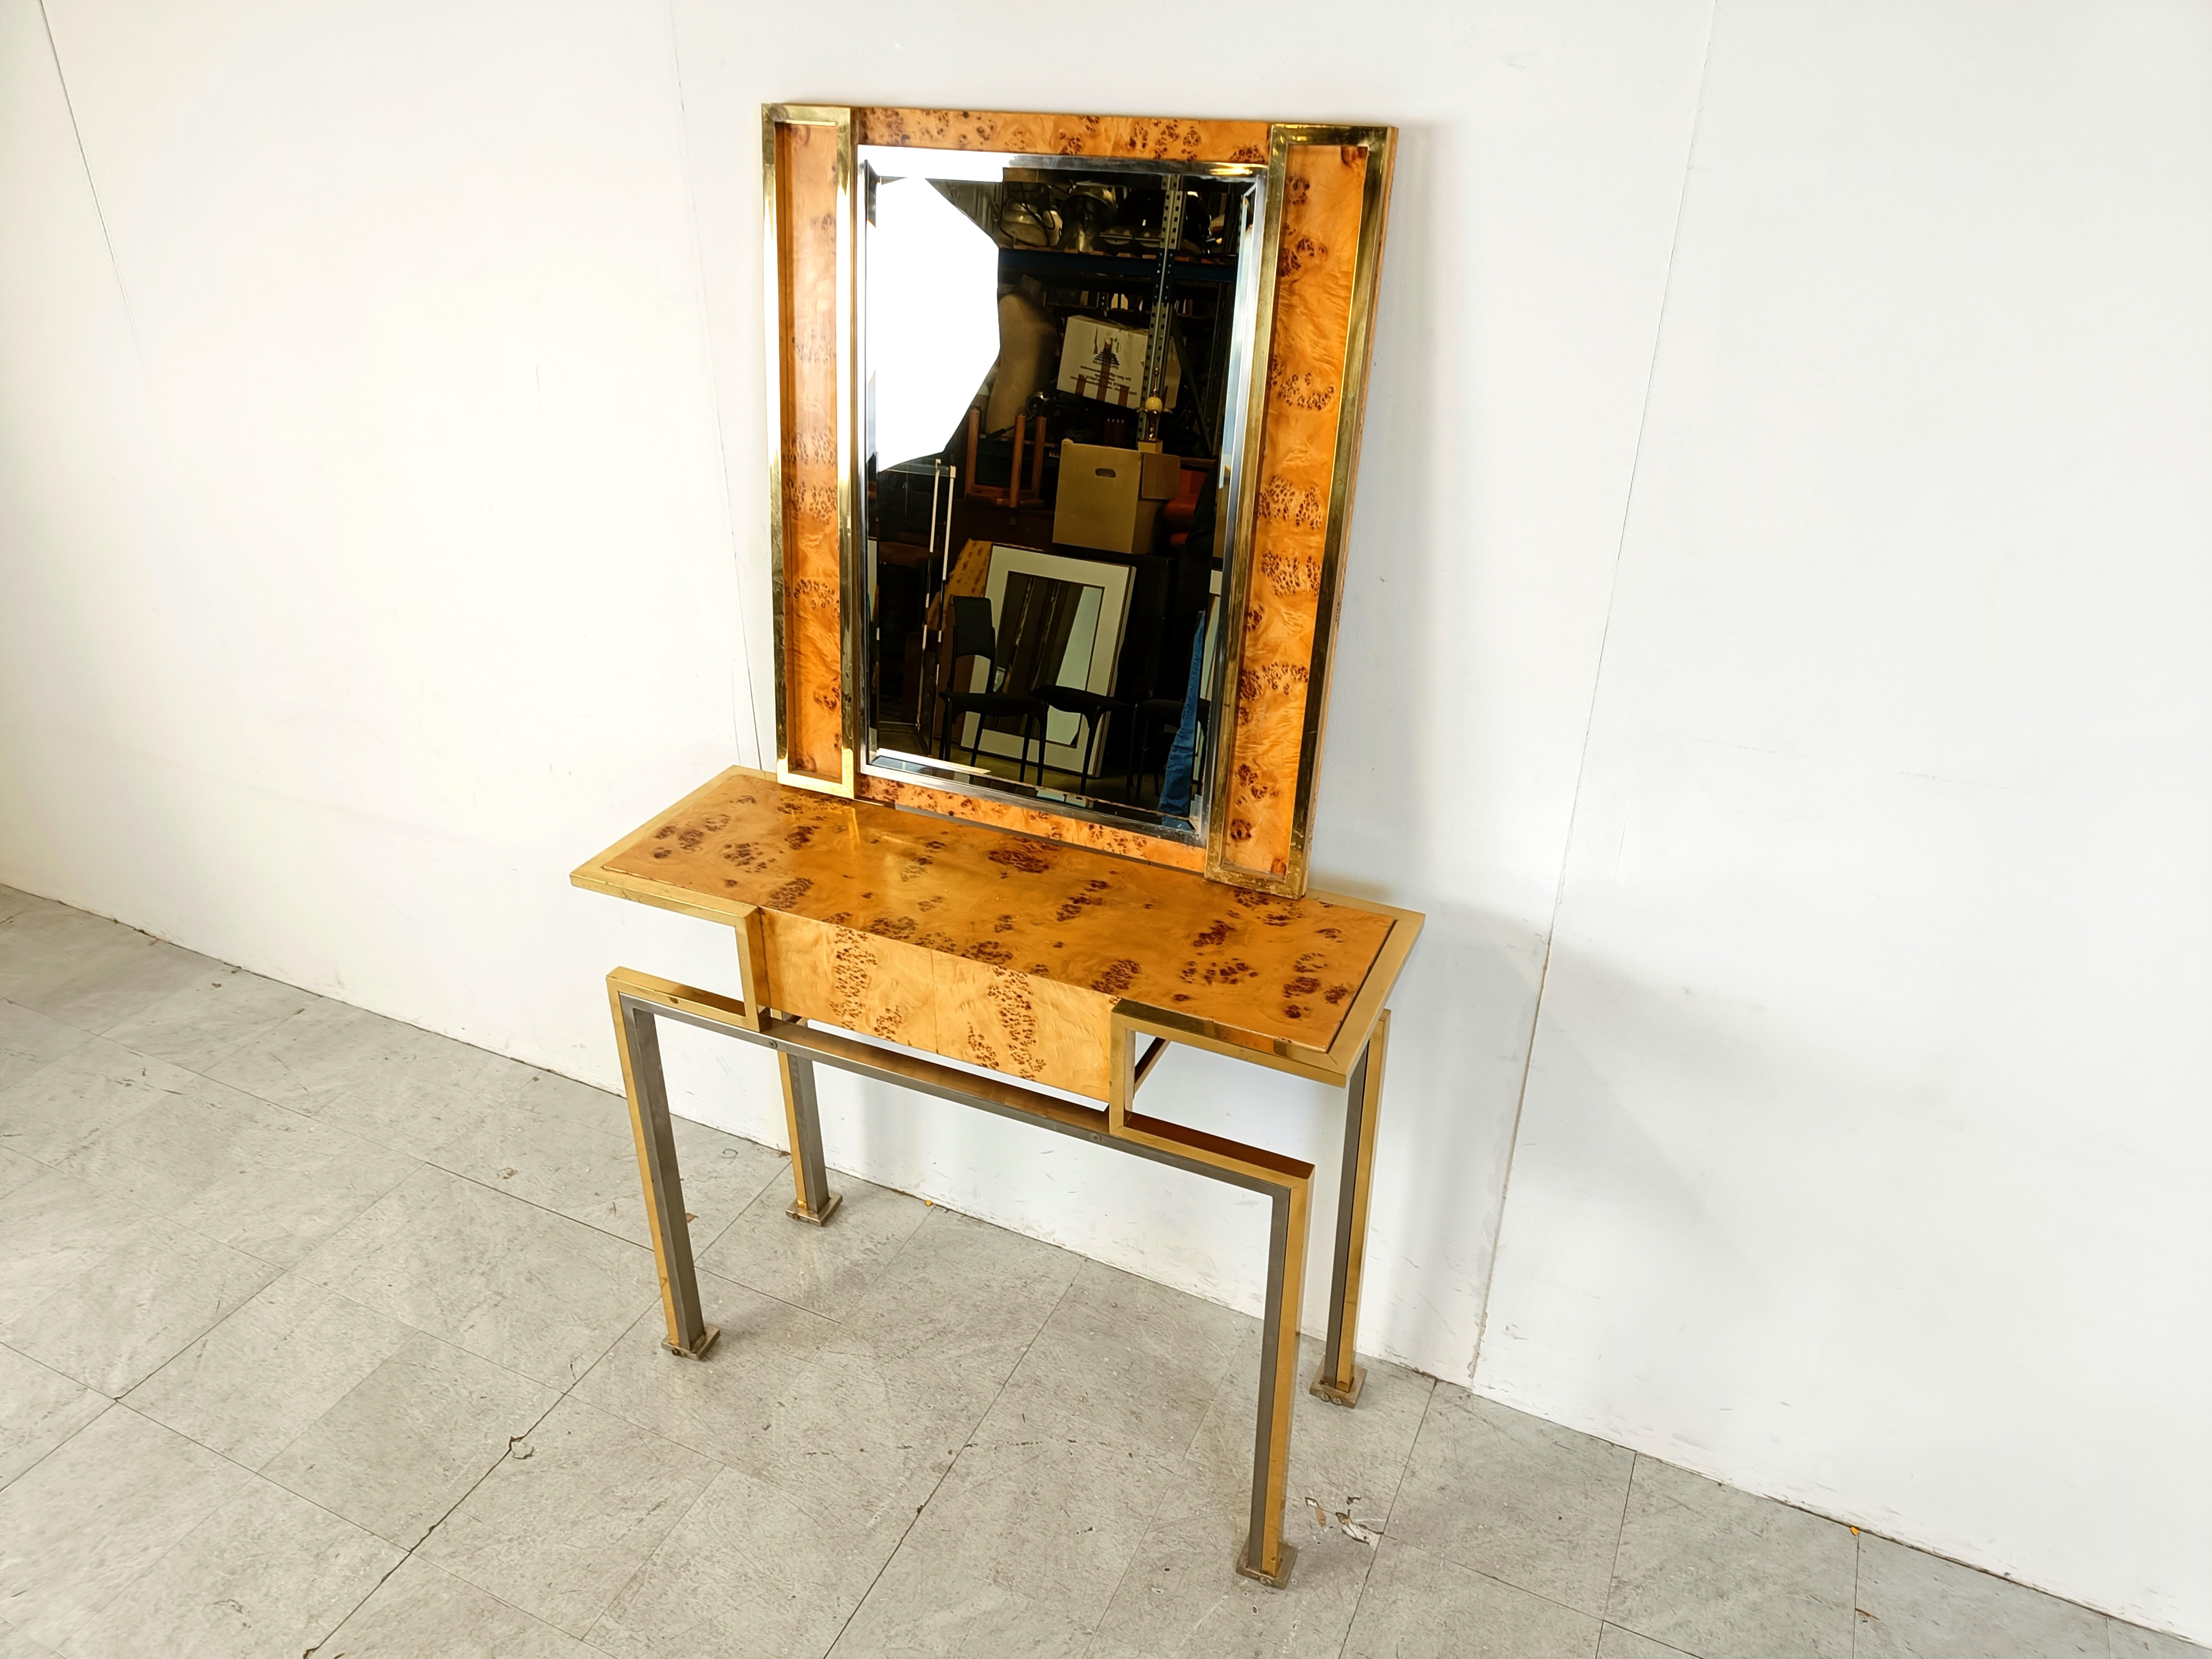 Hollywood regency console attributed to Willy Rizzo made from burl wood, brass and chrome.

It also comes with its matching mirror, which is rare.

The piece might very well be from Willy Rizzo, but unless catalogued or signed, we will not guarantee